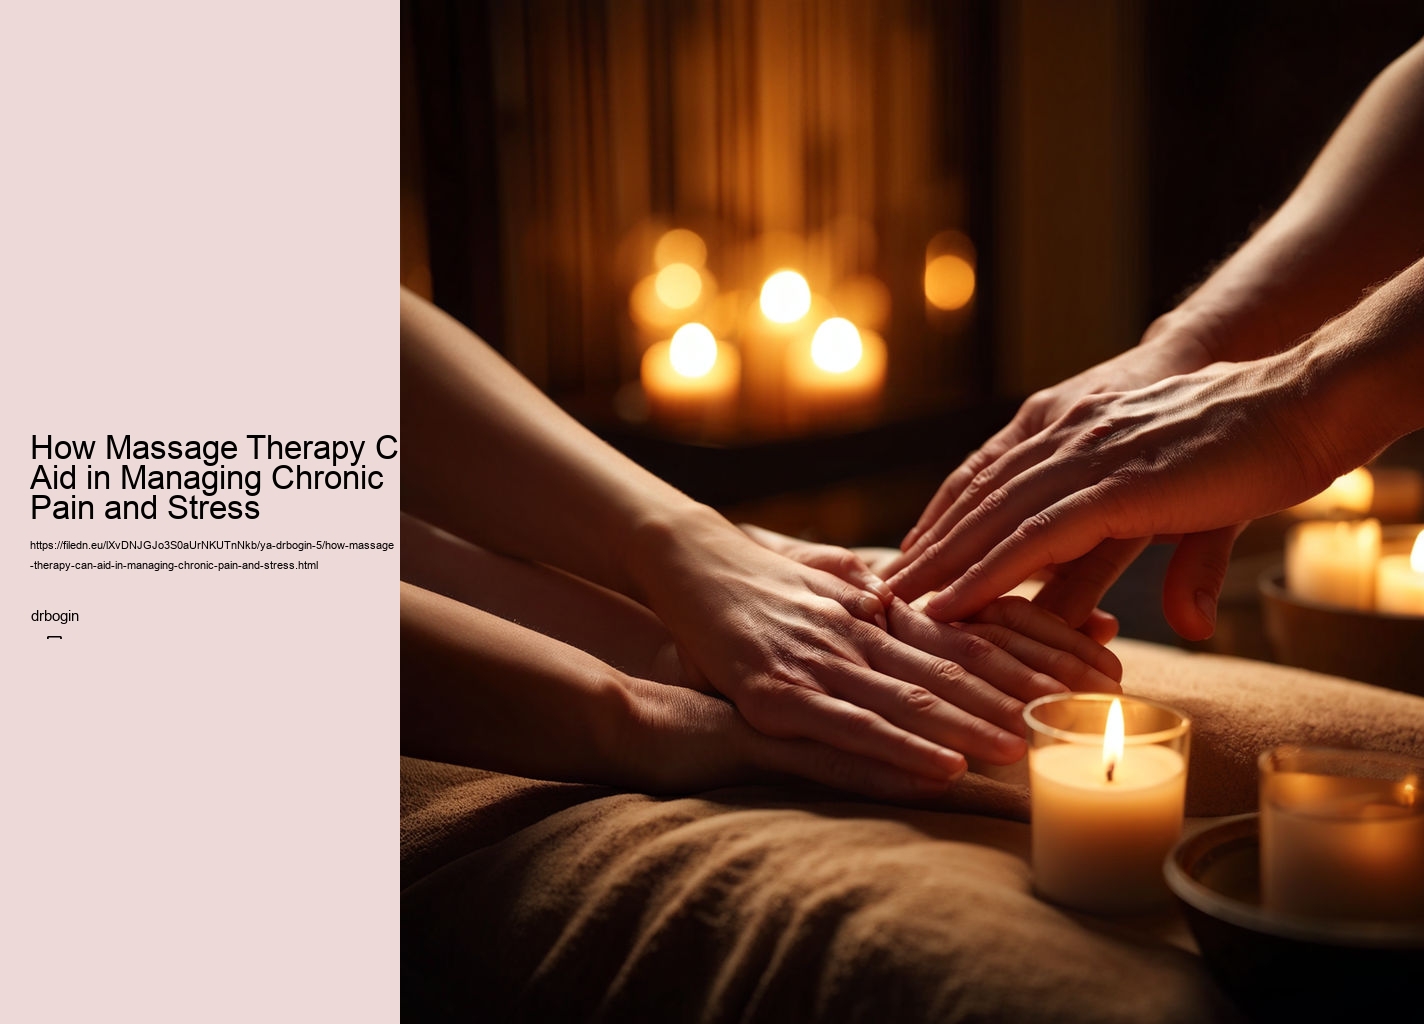 How Massage Therapy Can Aid in Managing Chronic Pain and Stress